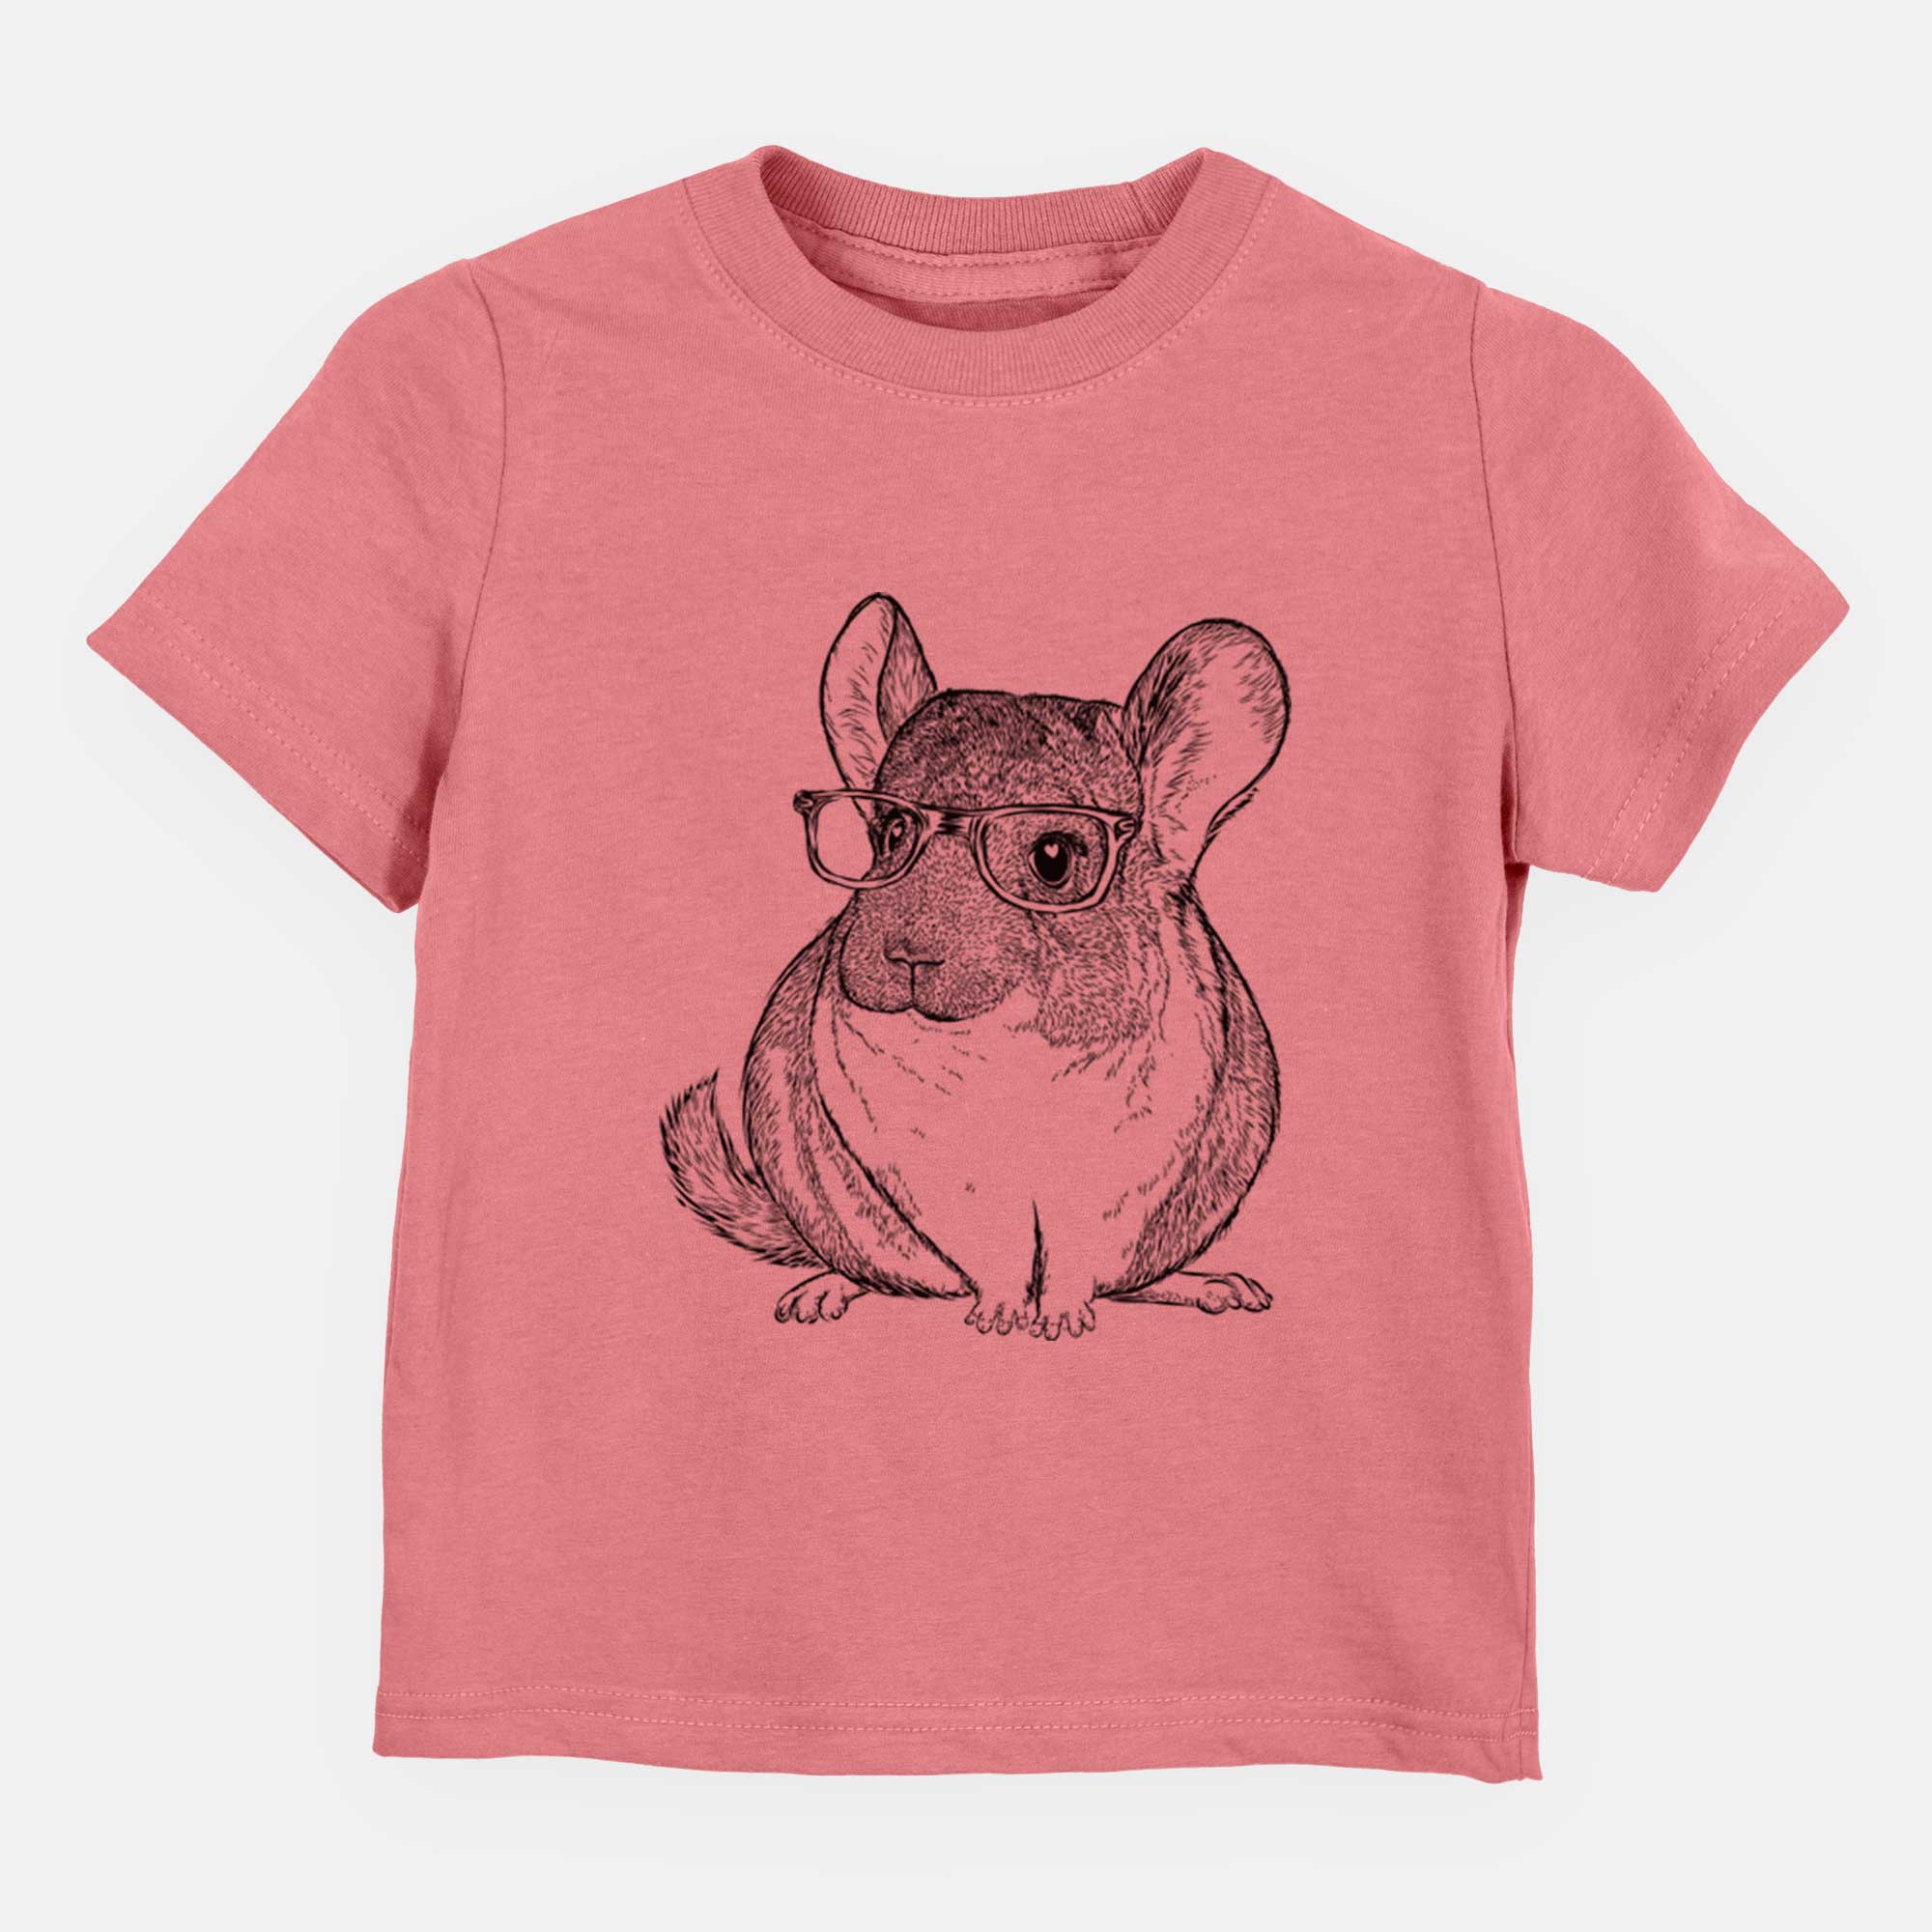 Chic Cheddar the Chinchilla - Kids/Youth/Toddler Shirt